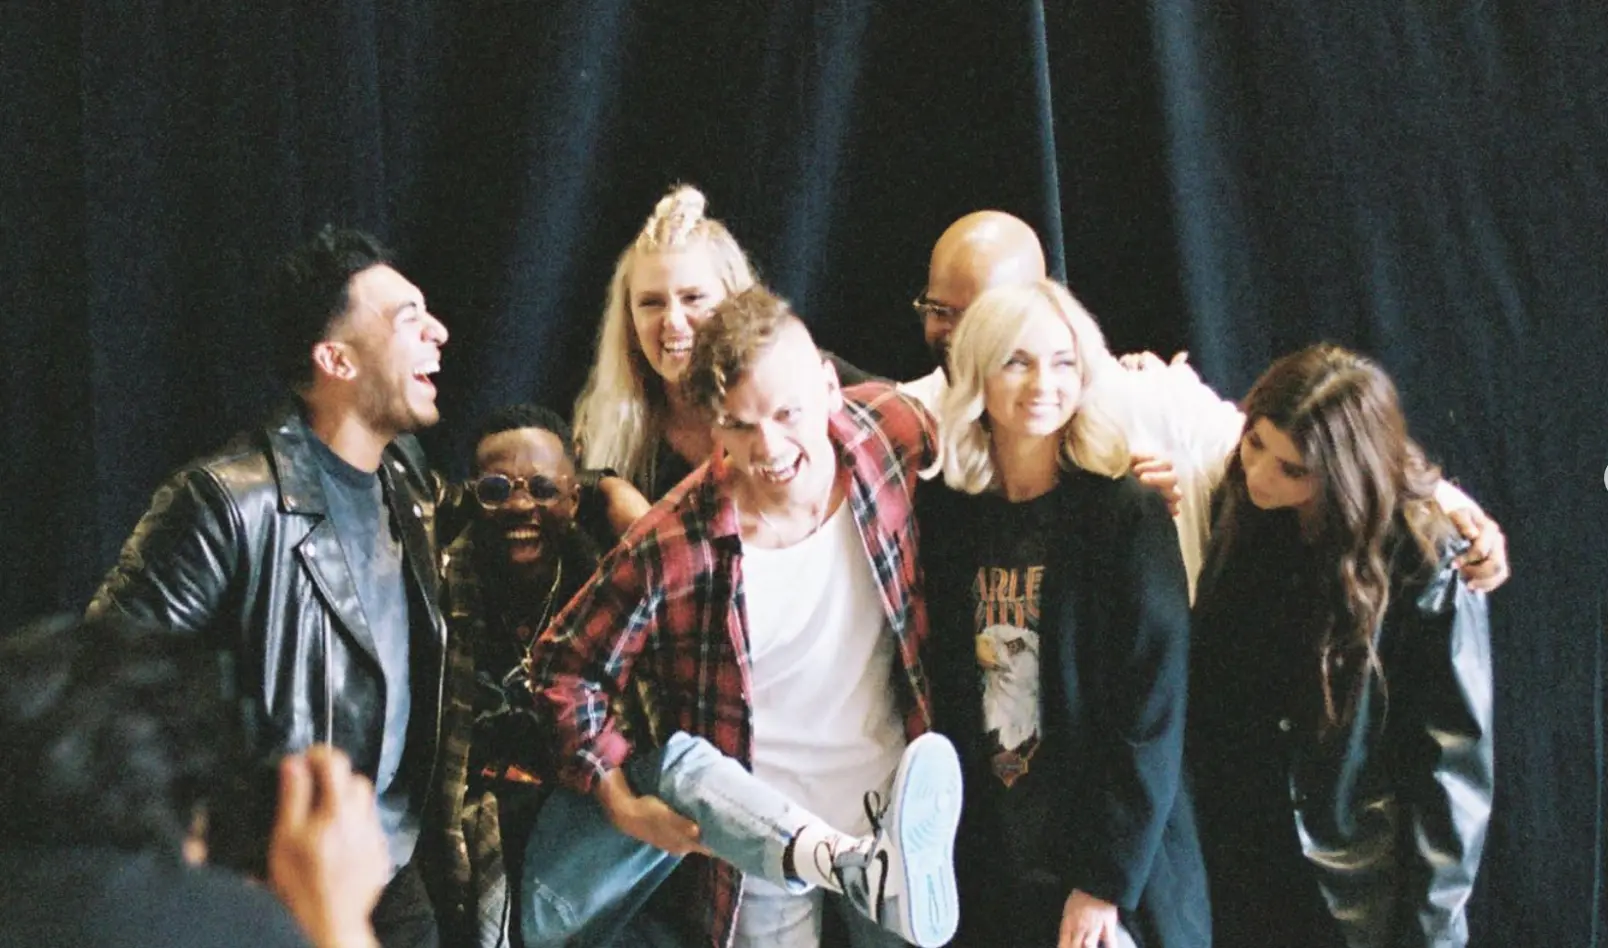 elevation worship taking a photo together